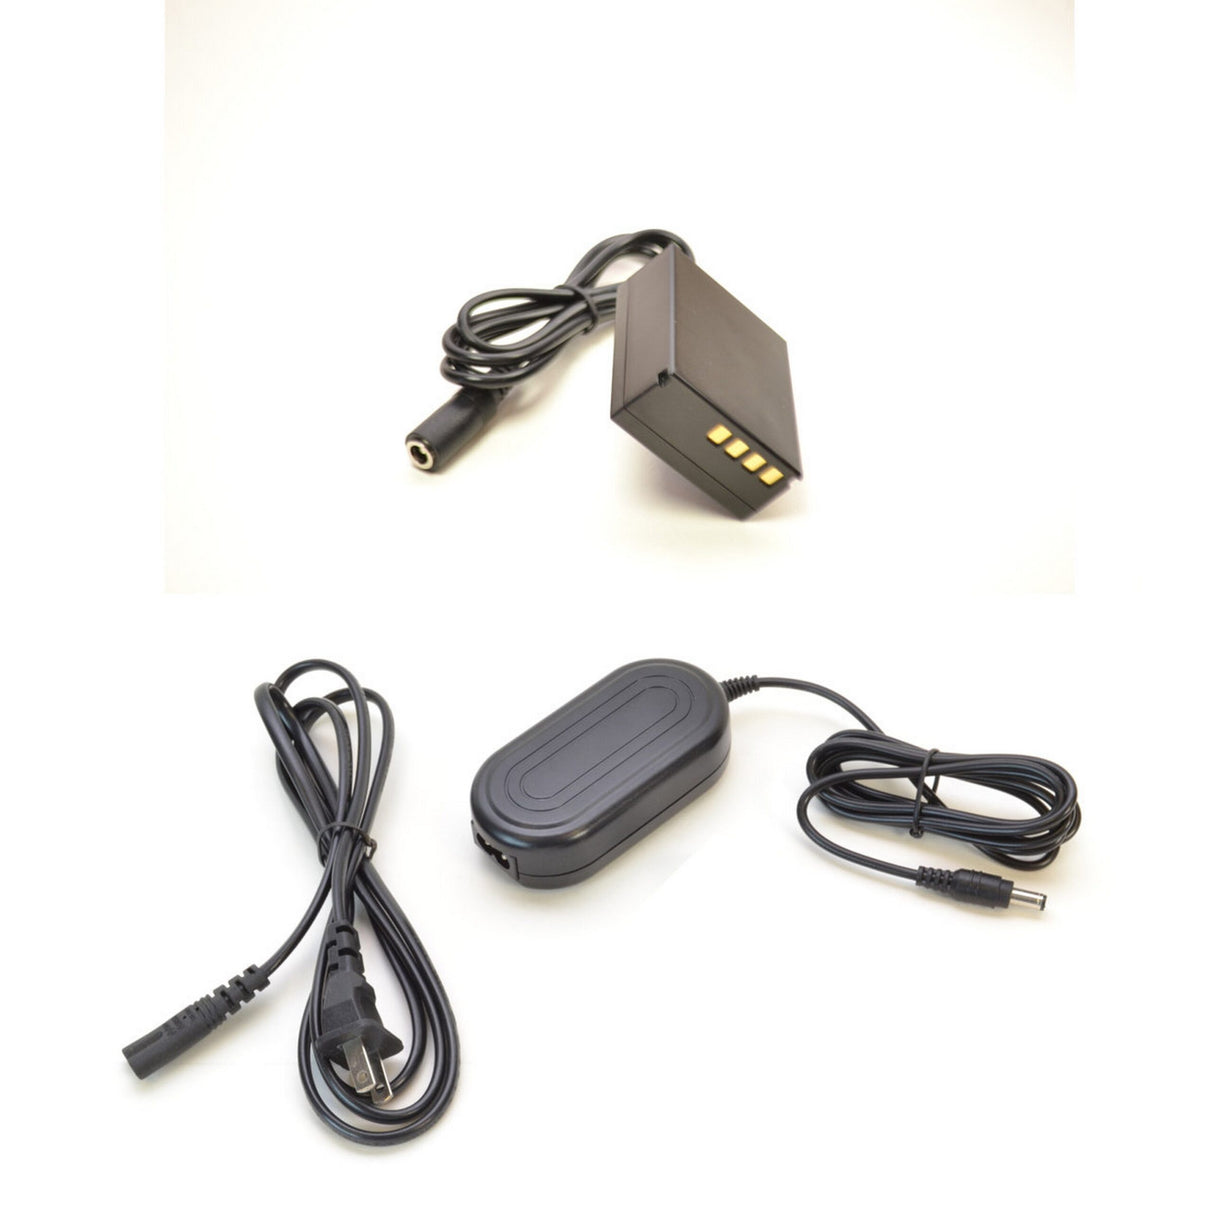 Bescor BLH1AC BLH1 Dummy and AC Power Supply for Olympus Digital Cameras